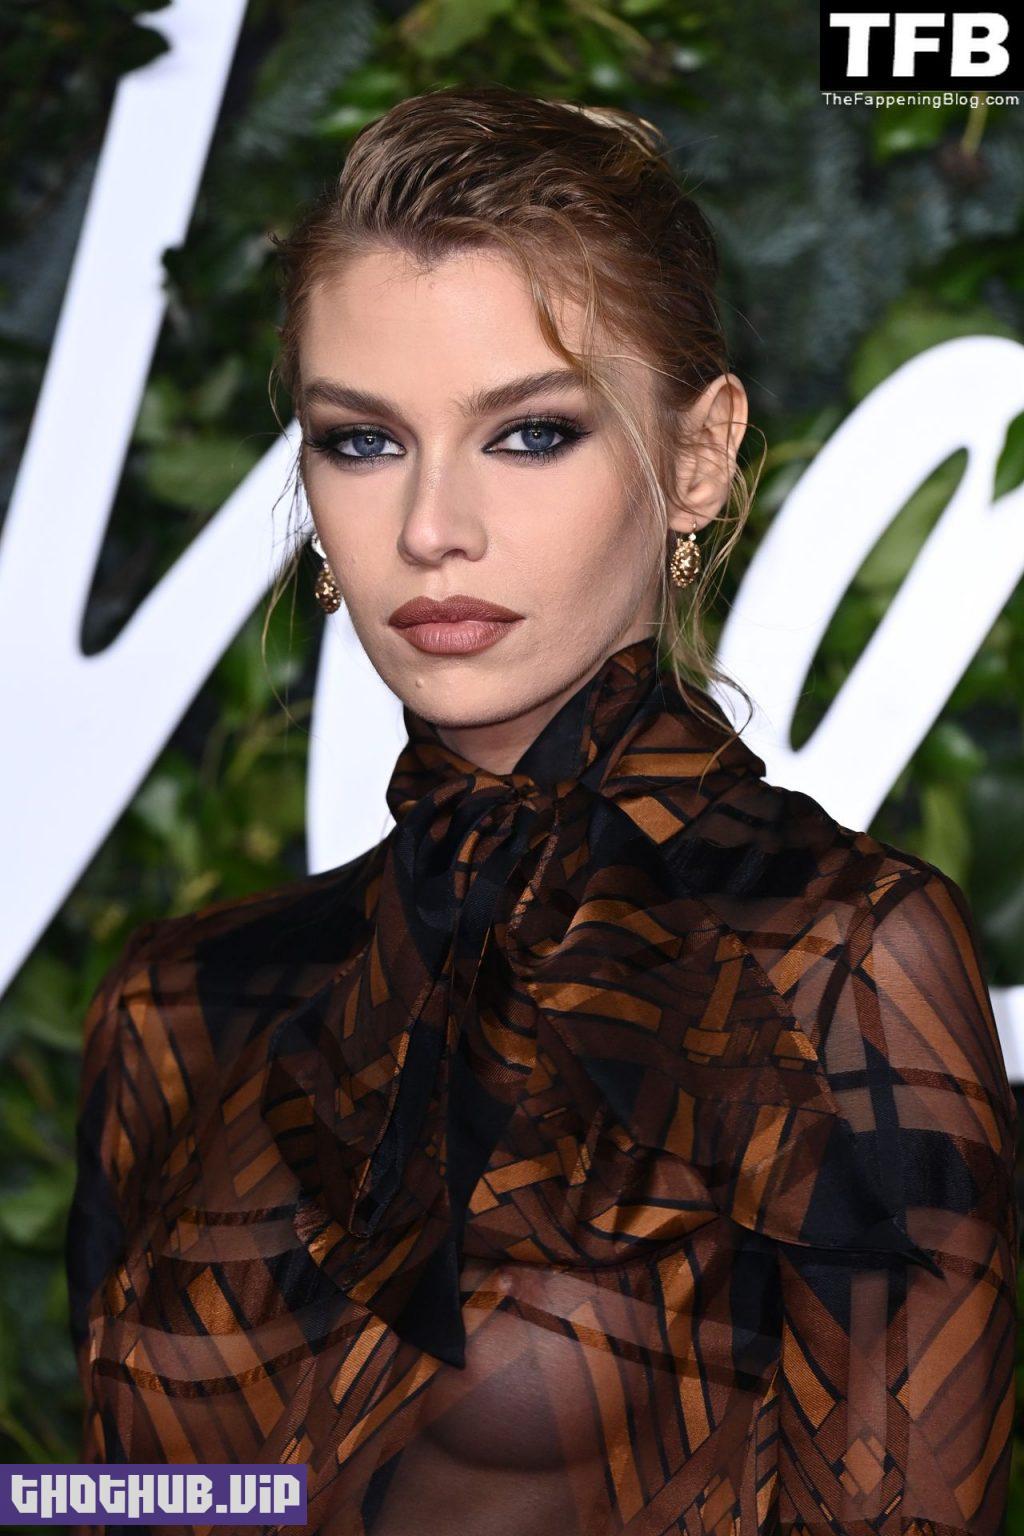 Stella Maxwell See Through Nude The Fappening Blog 79